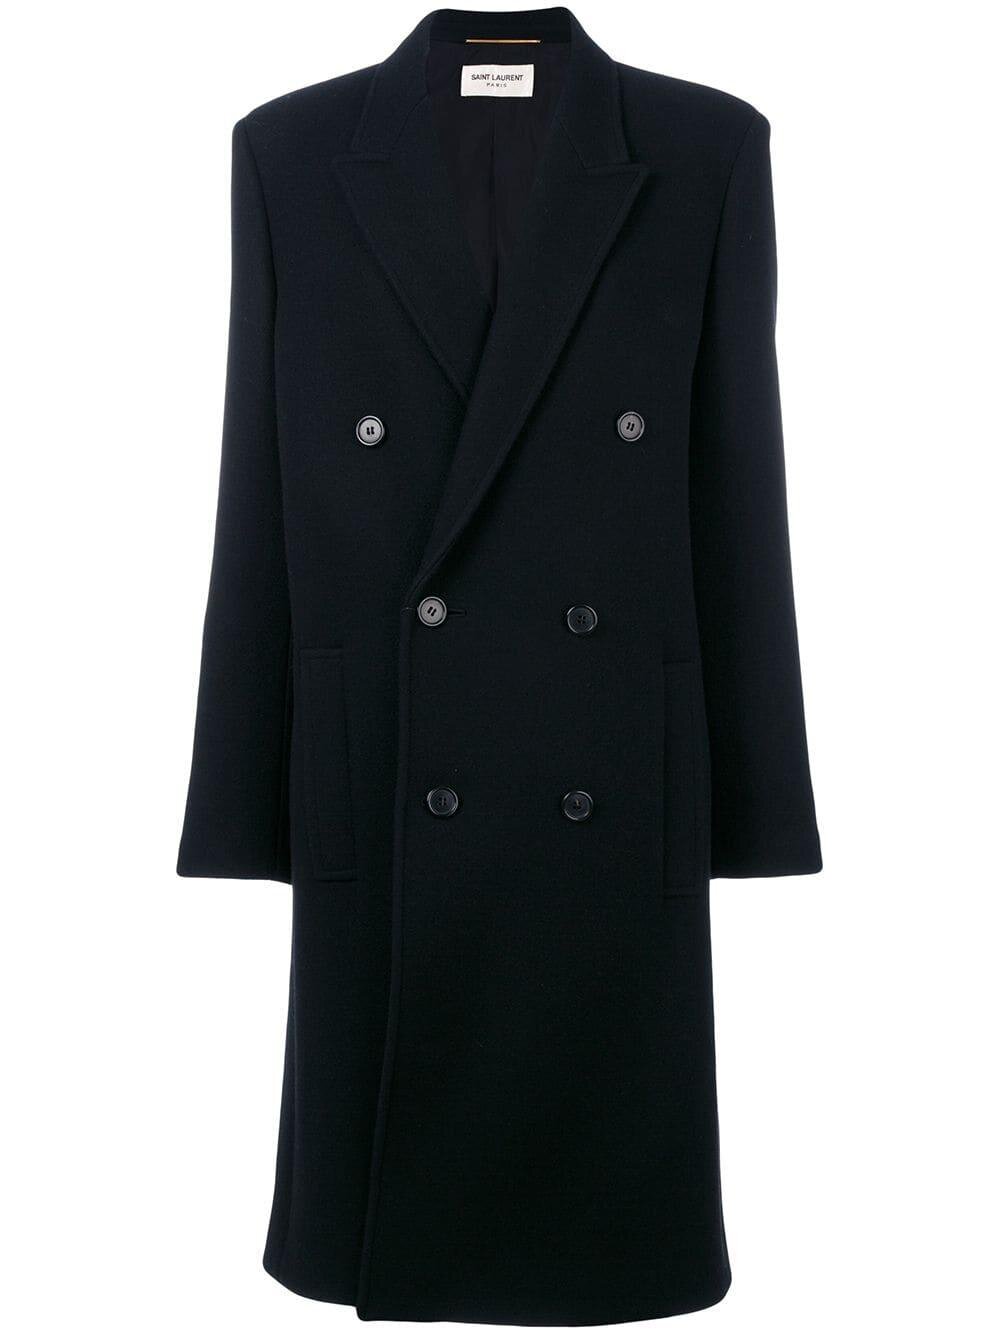 Saint Laurent Double-Breasted Coat in Black — UFO No More